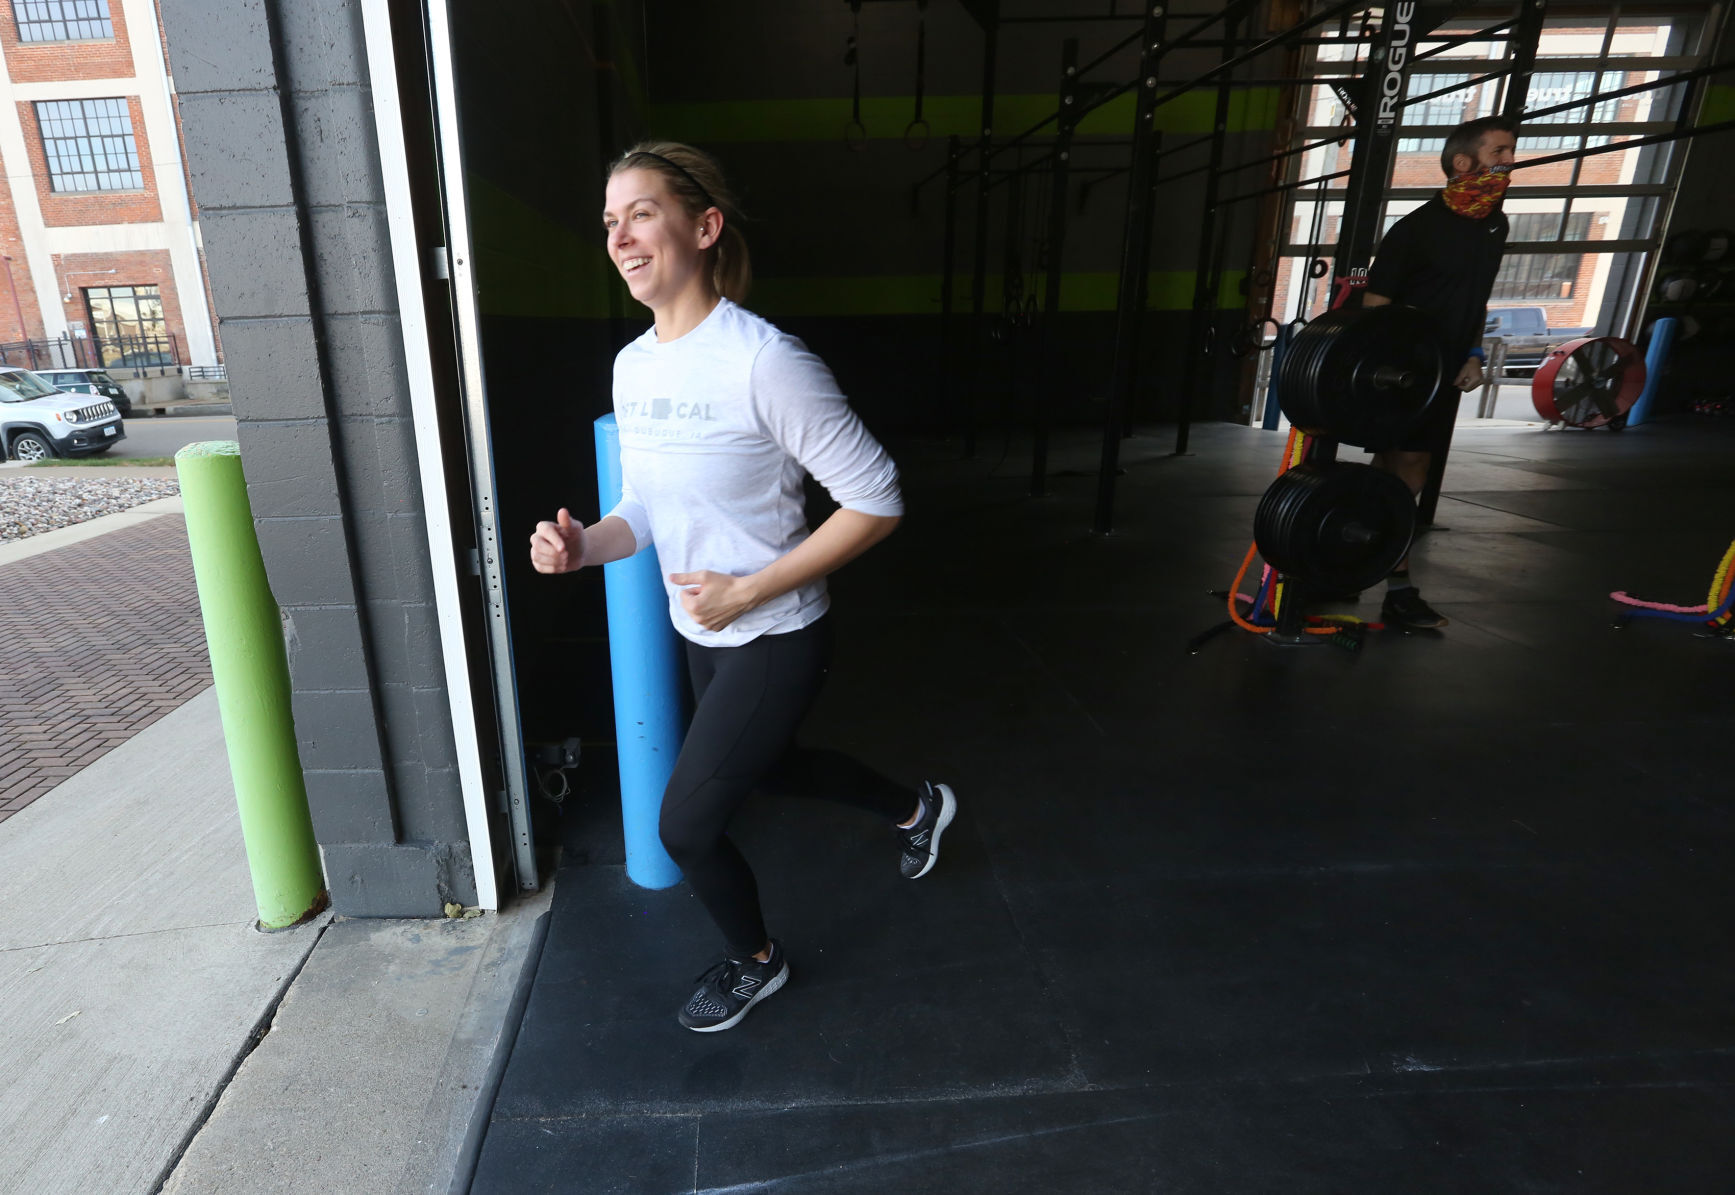 Kaley Rigdon, of Dubuque, participates in a workout at Volv Dubuque Fitness in Dubuque on Friday. PHOTO CREDIT: JESSICA REILLY